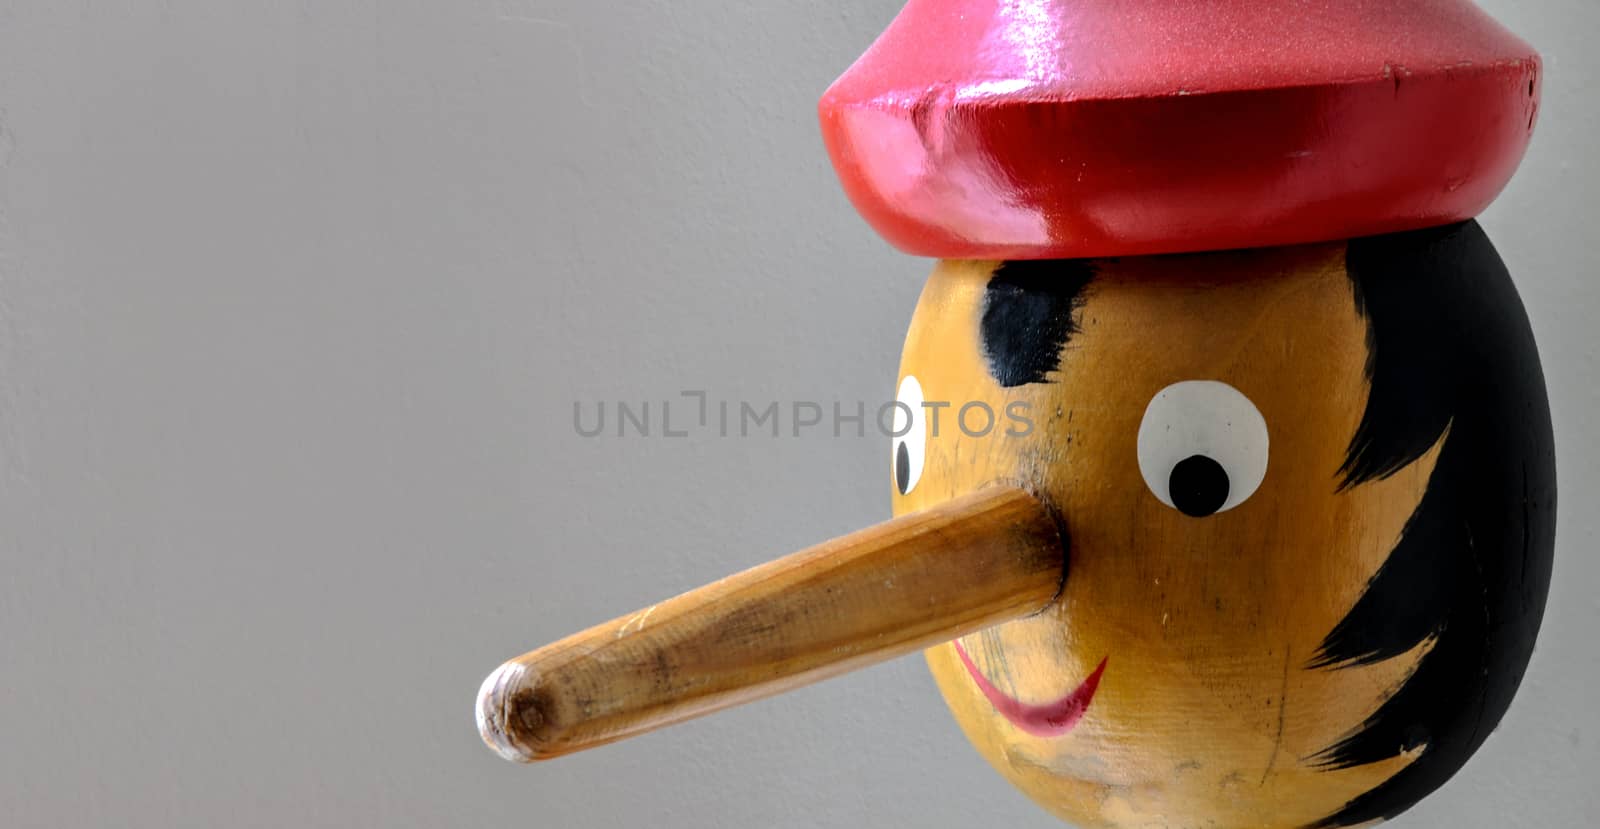 Pinocchio: The wooden puppet by easyclickshop